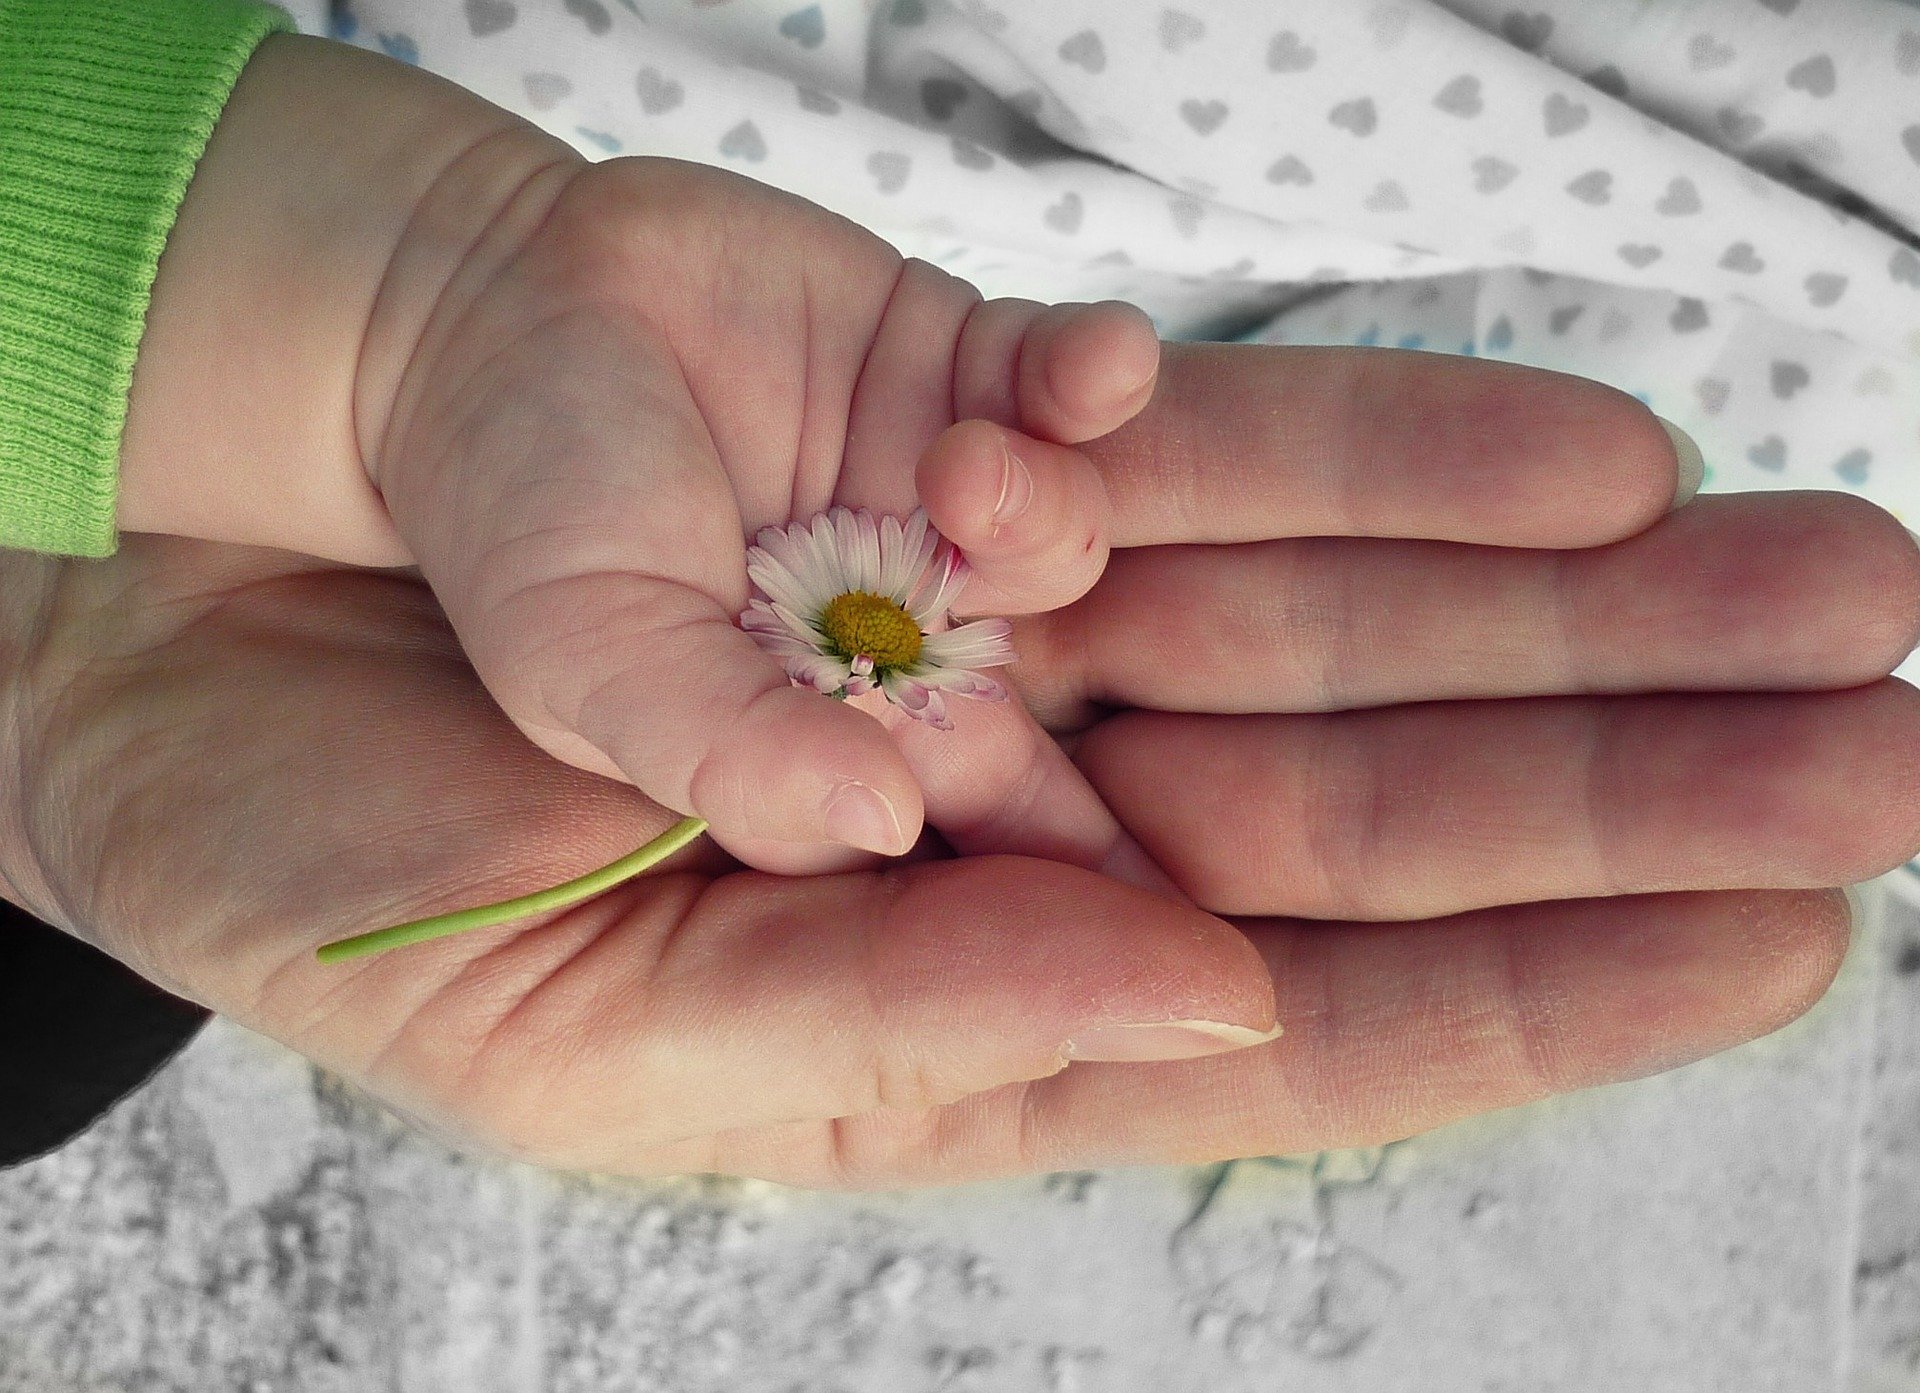 An illustration of a child's hand in that of an adult to depict trust and care. | Source: Pixabay.